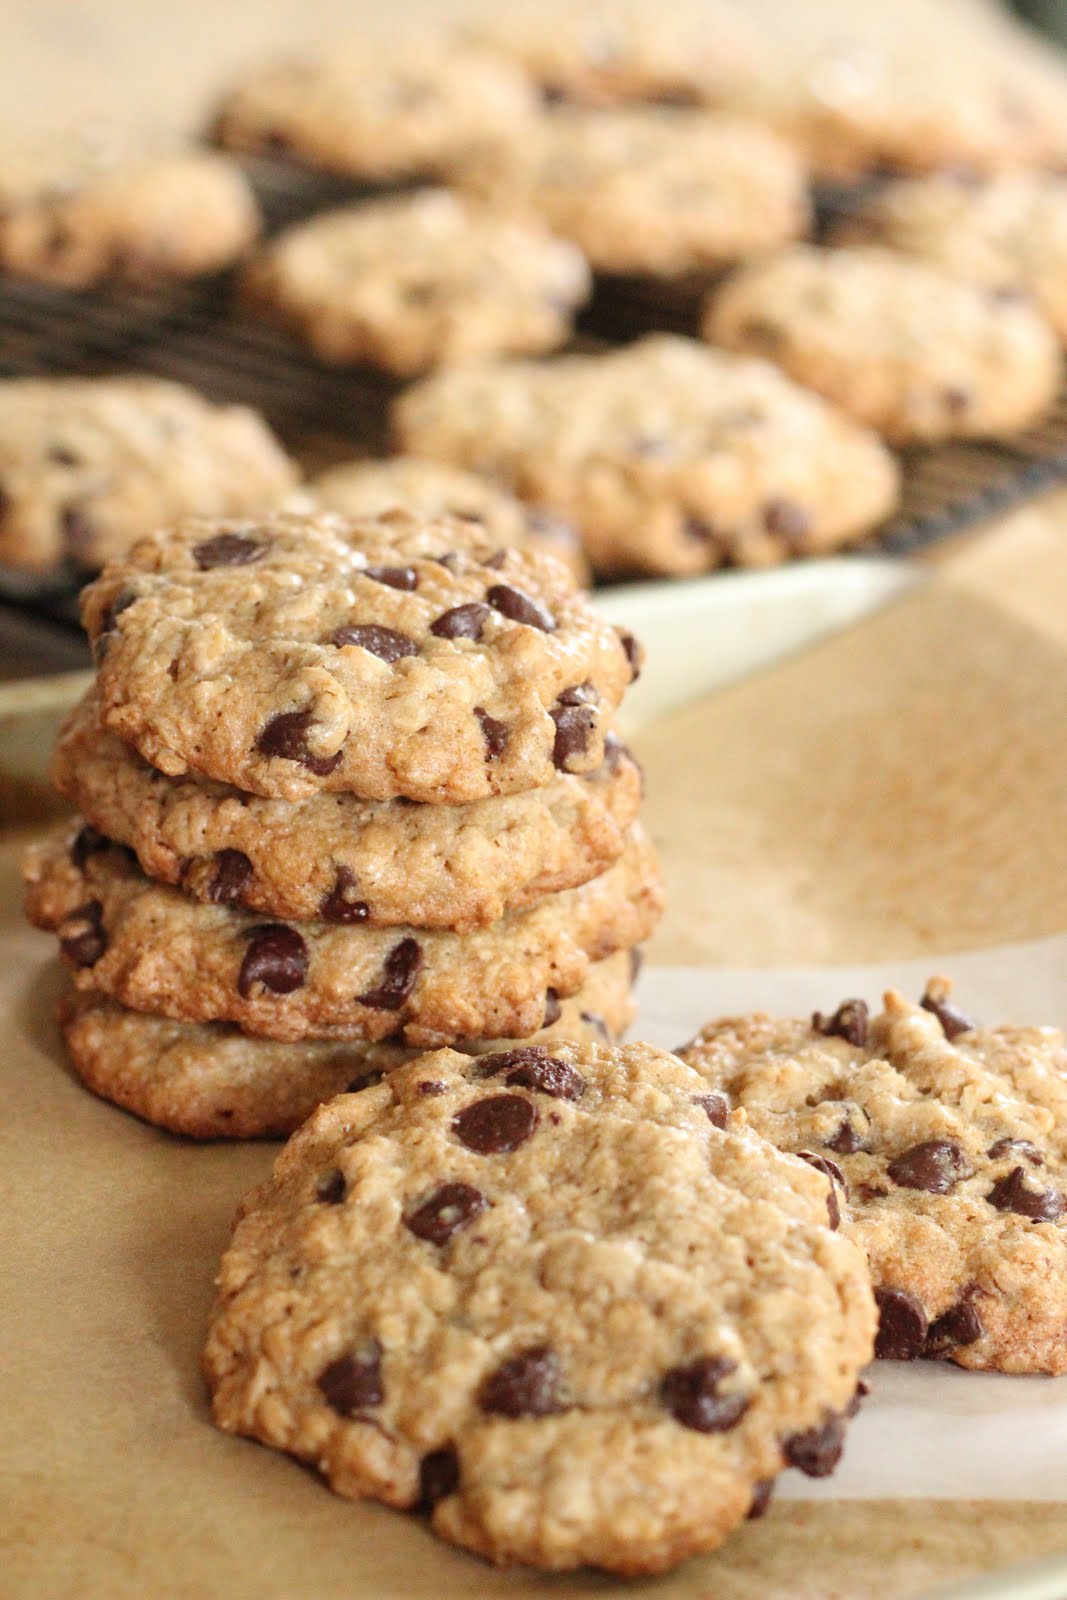 Ultimate healthier oatmeal and chocolate chip cookies